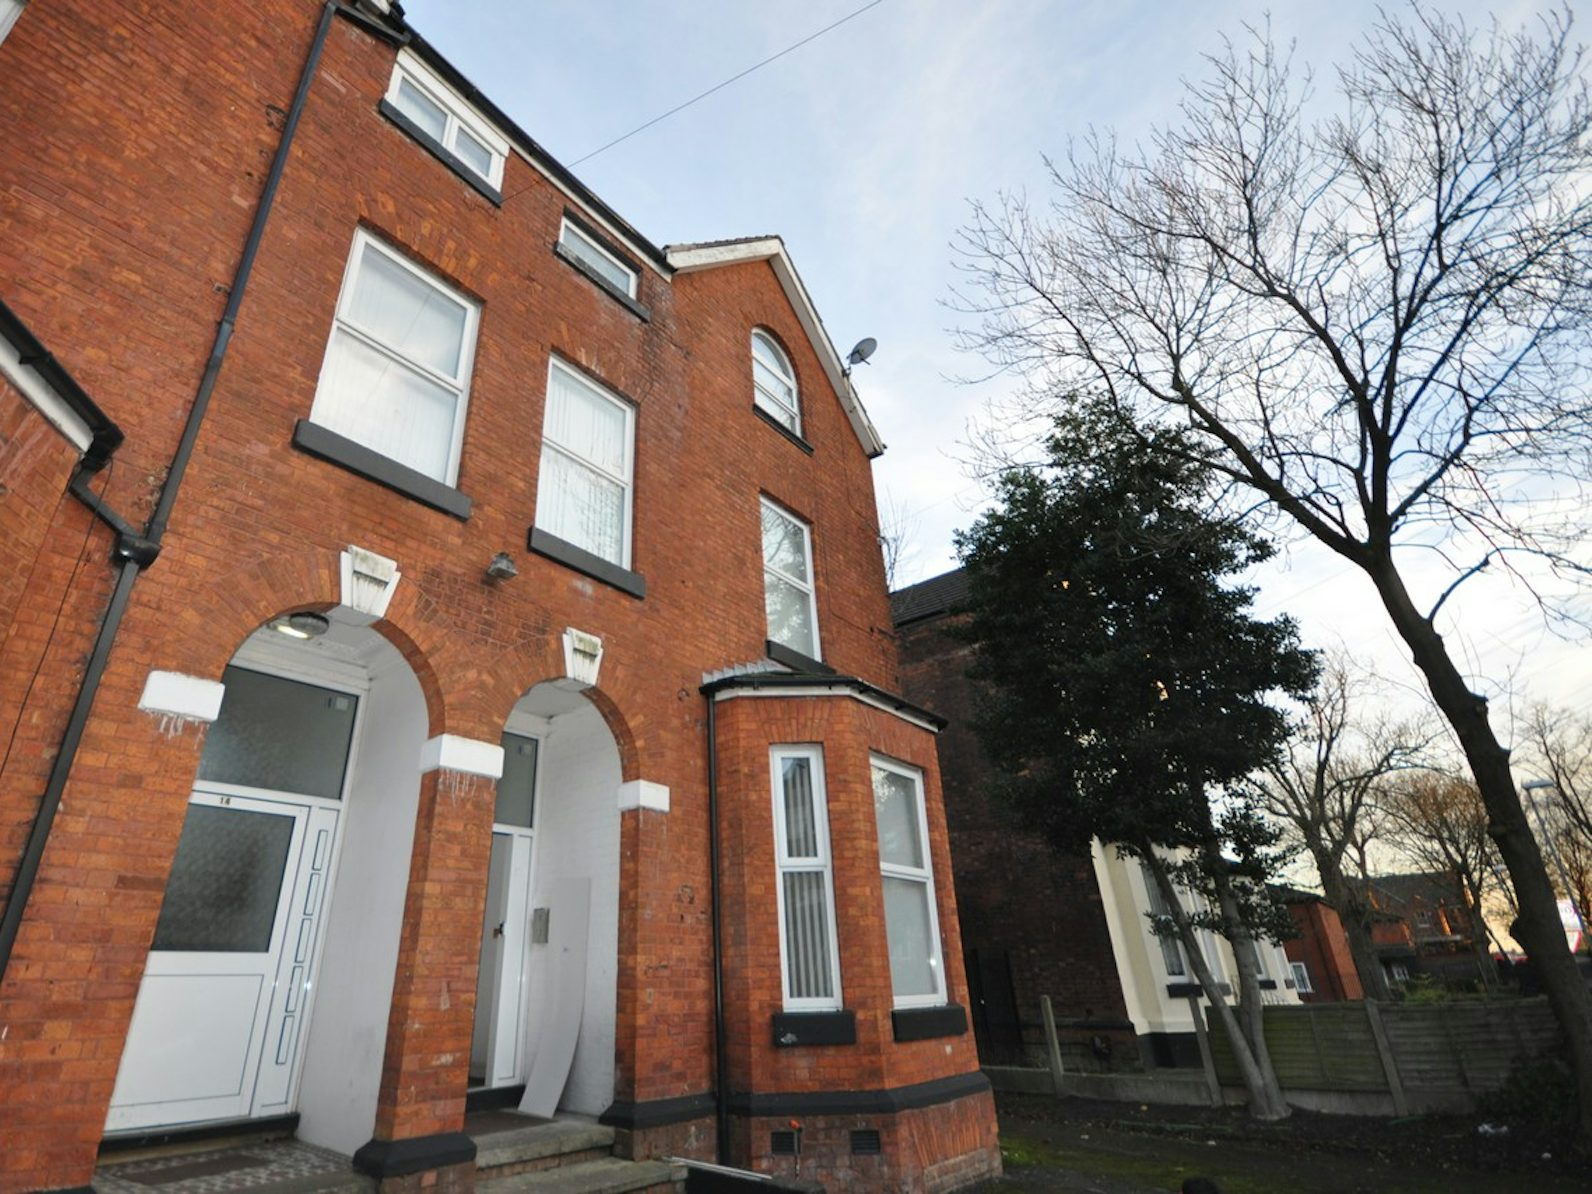 Flat to rent on St Marys Hall Road Manchester, M8